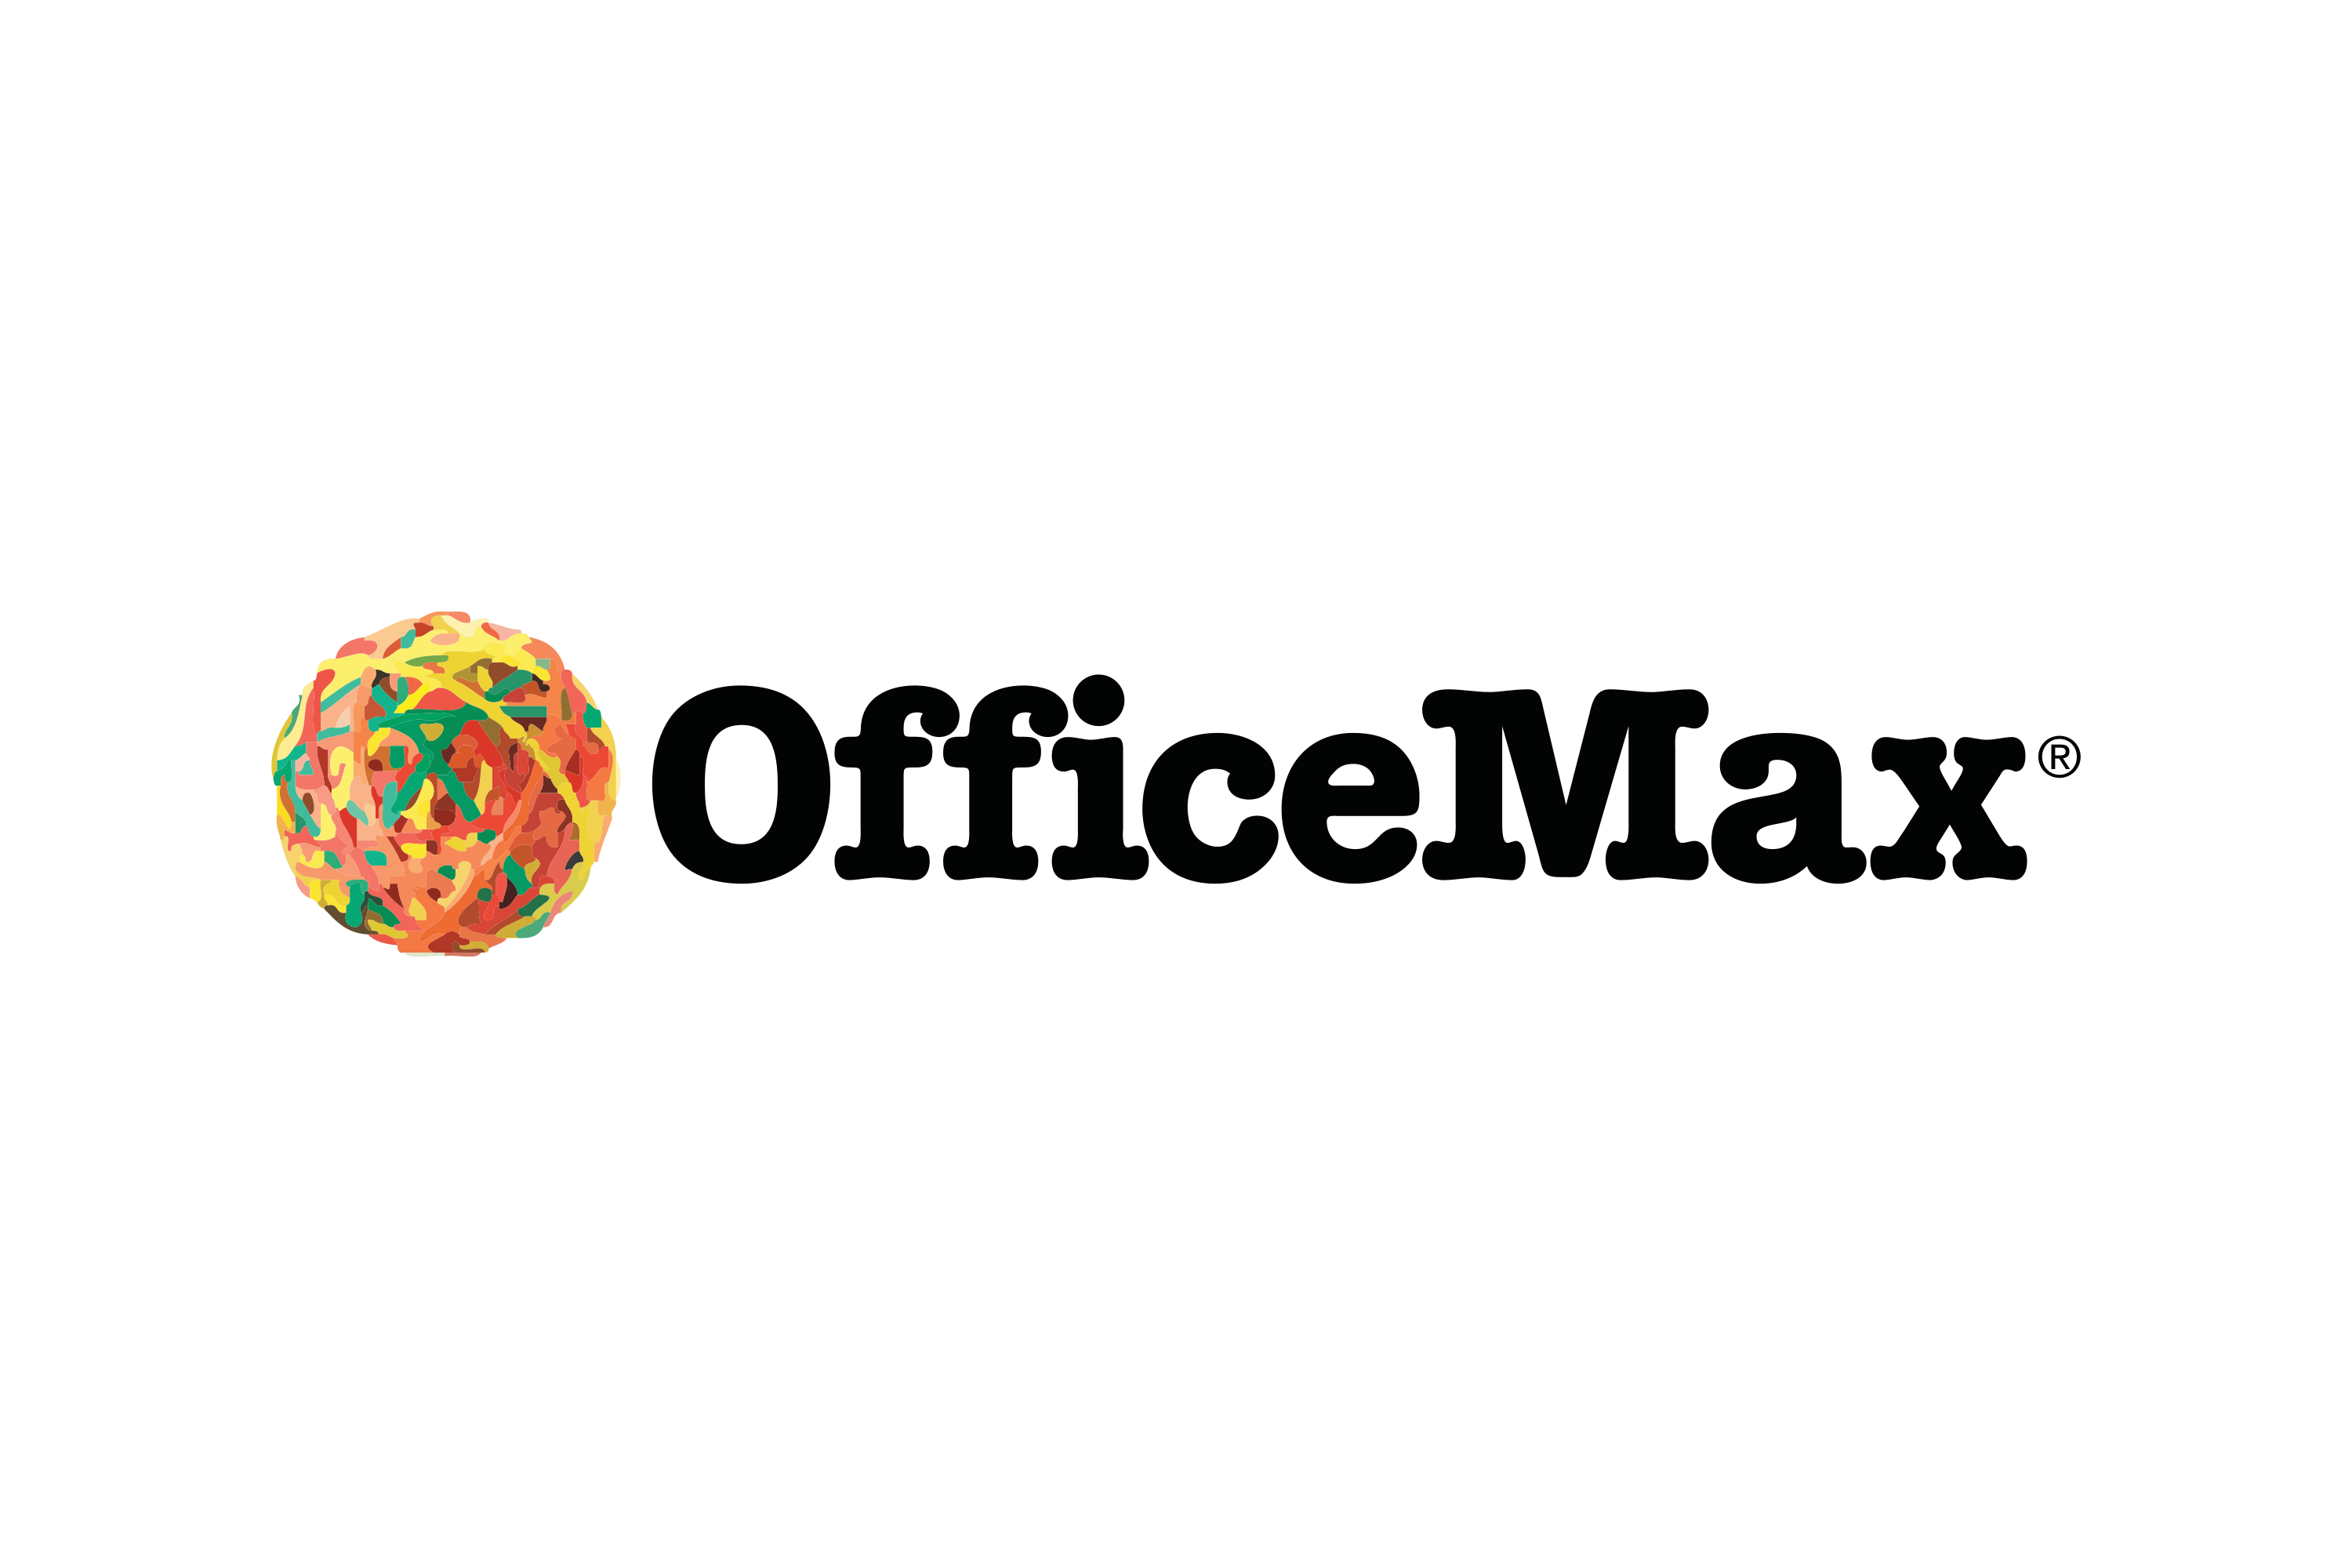 Download OfficeMax Logo in SVG Vector or PNG File Format 